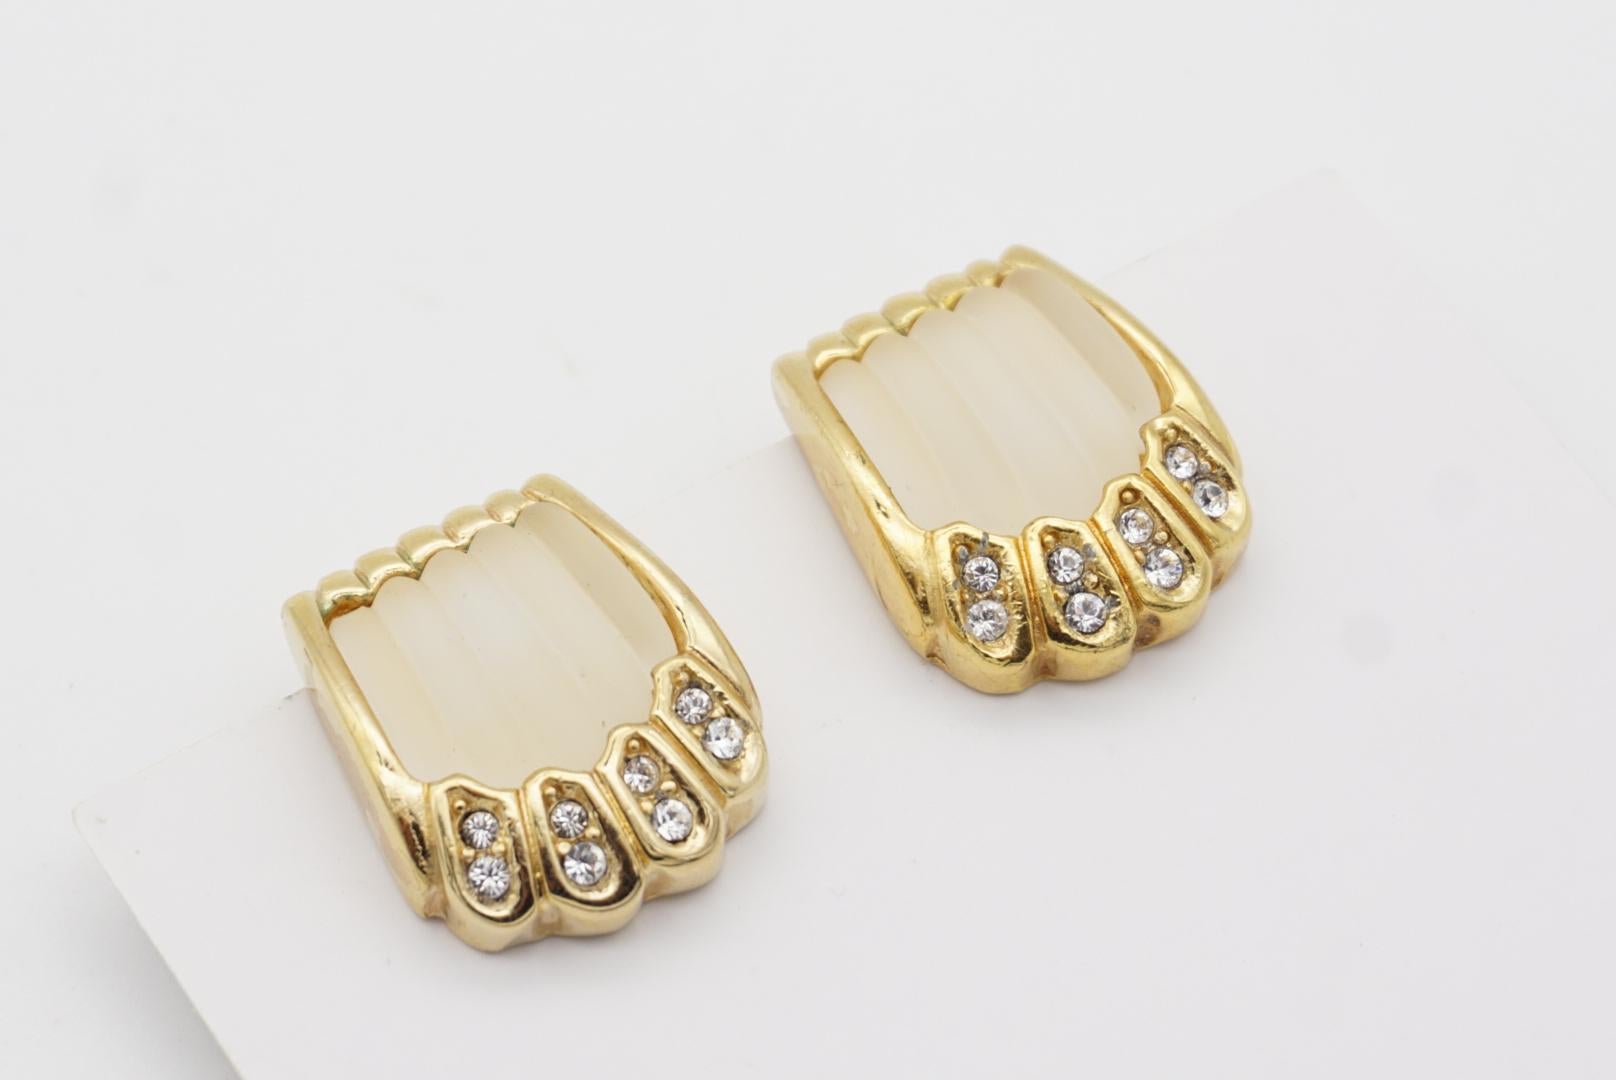 Christian Dior Vintage 1980s White Jelly Belly Shell Crystals Clip On Earrings In Excellent Condition For Sale In Wokingham, England